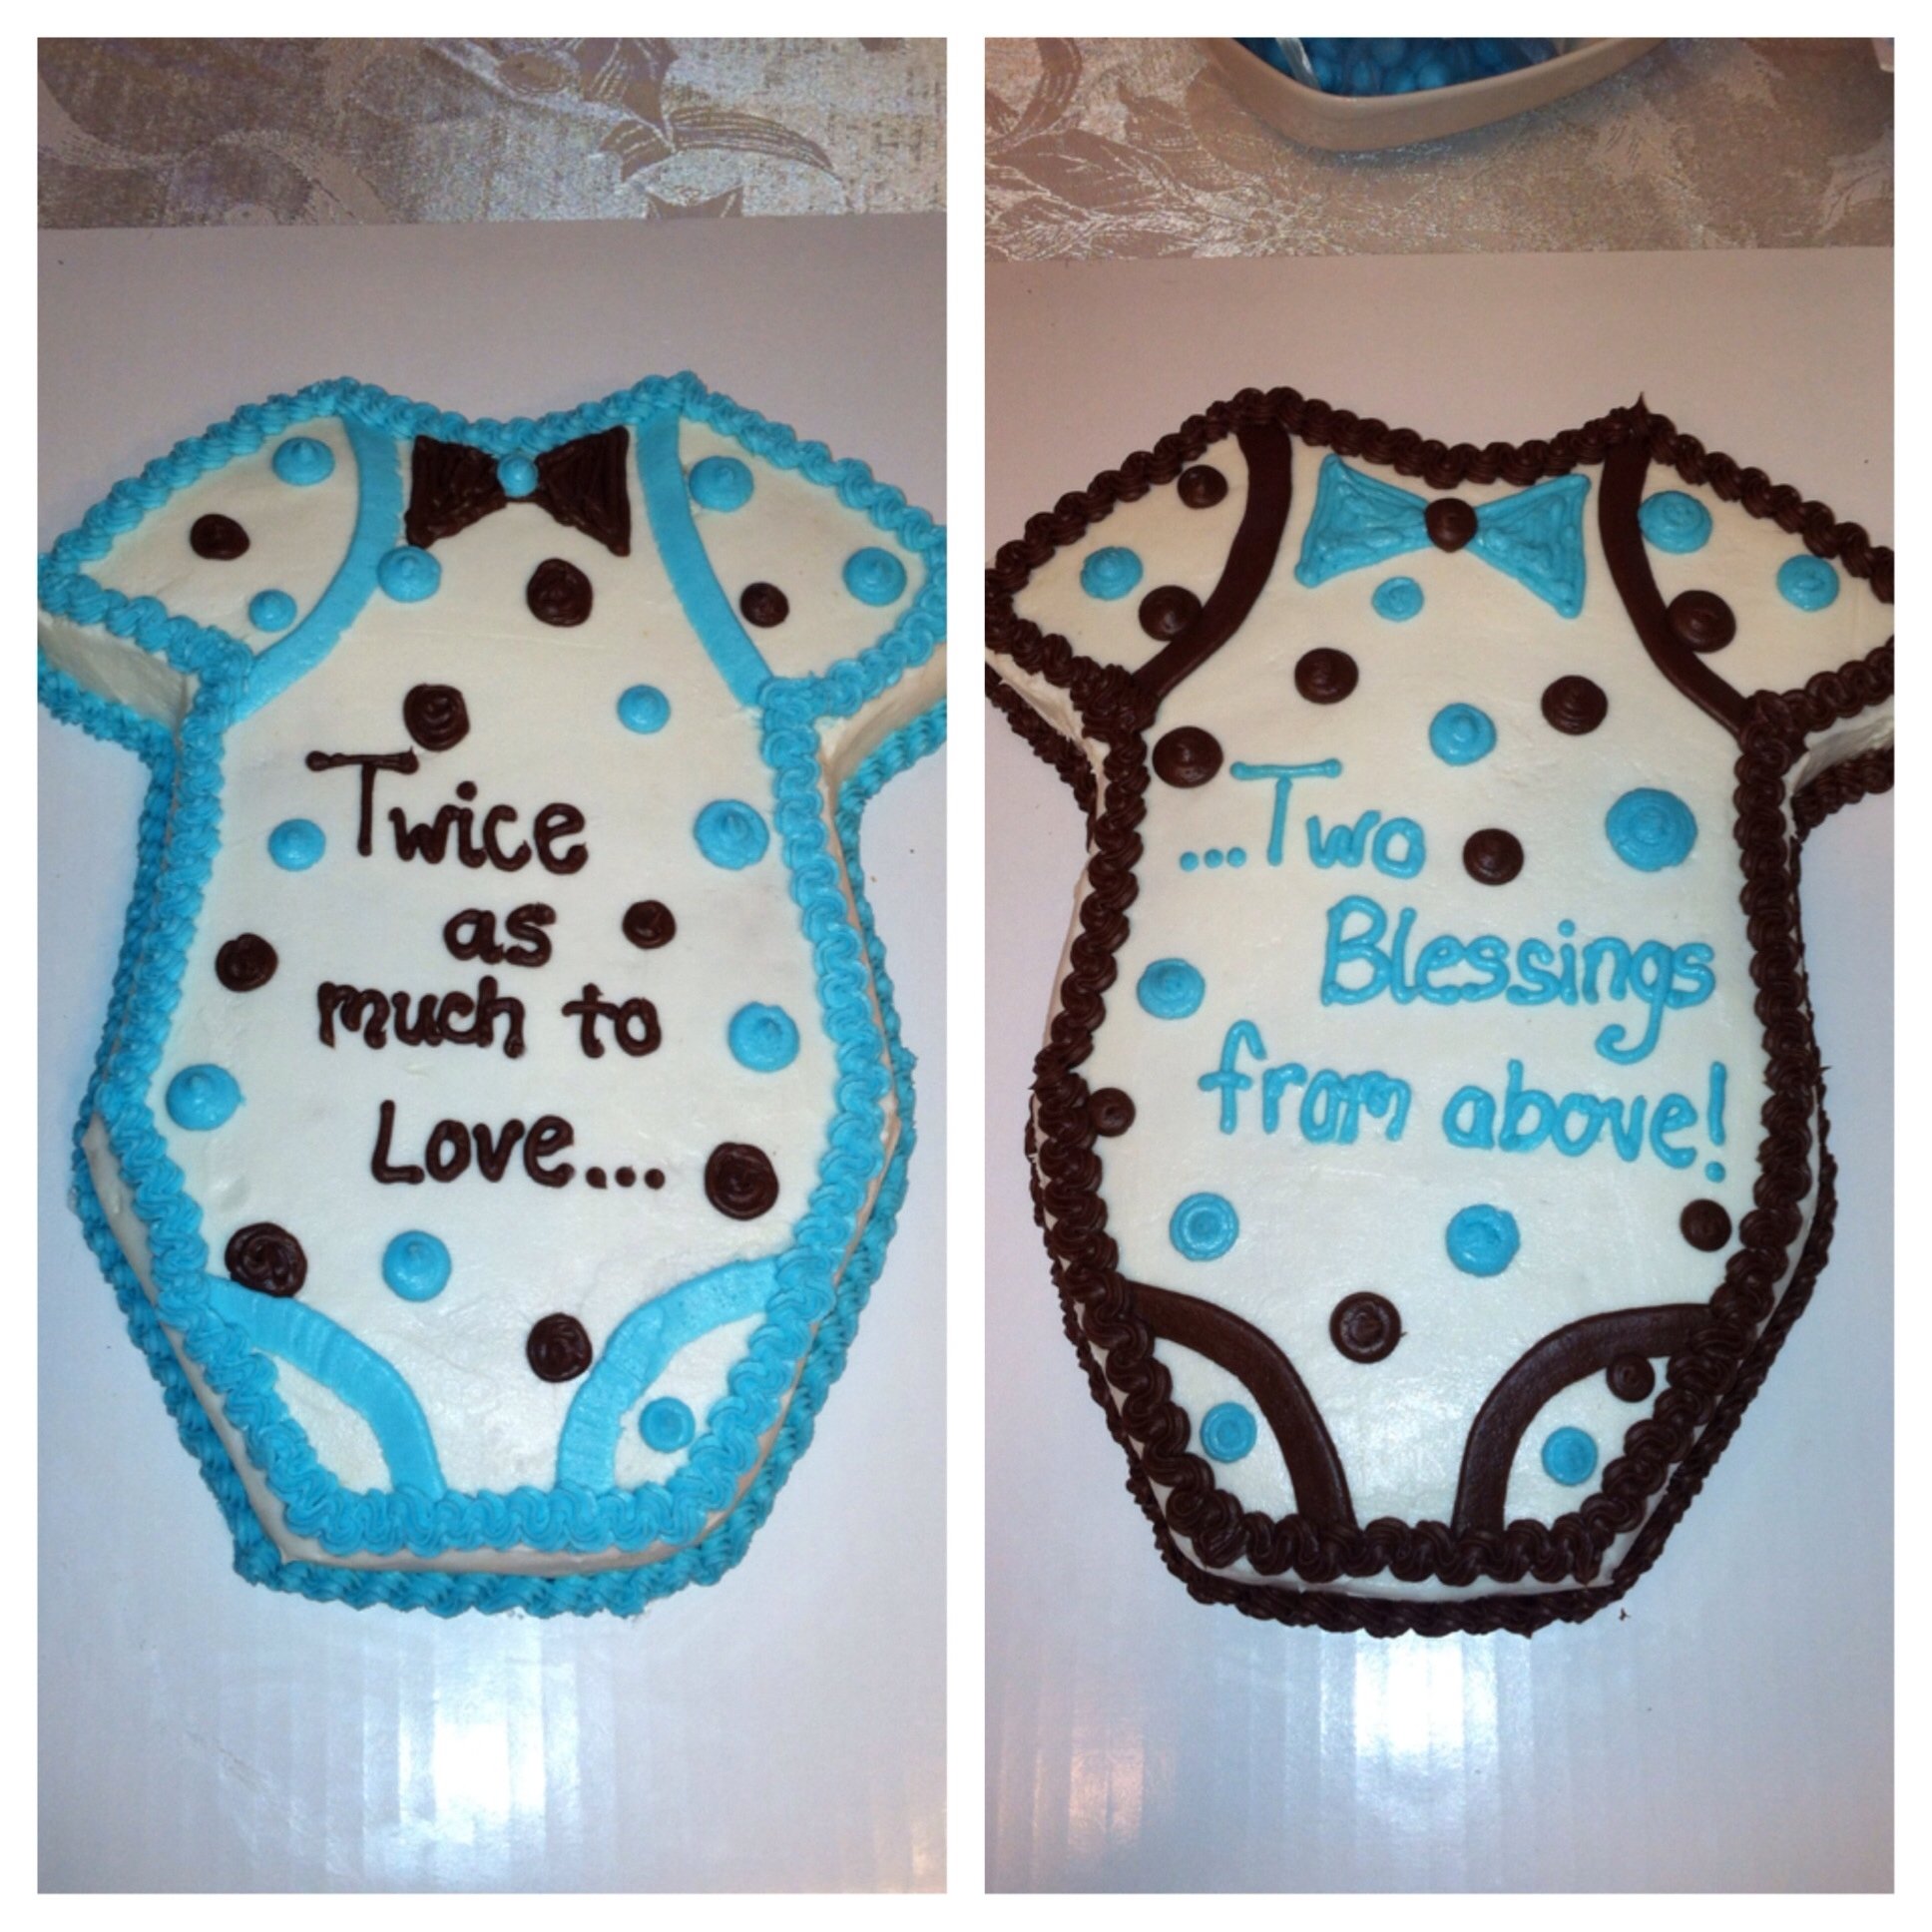 10 Cute Baby Shower Ideas For Twin Boys twin baby boy shower cakes personal pinterest successes 1 2022